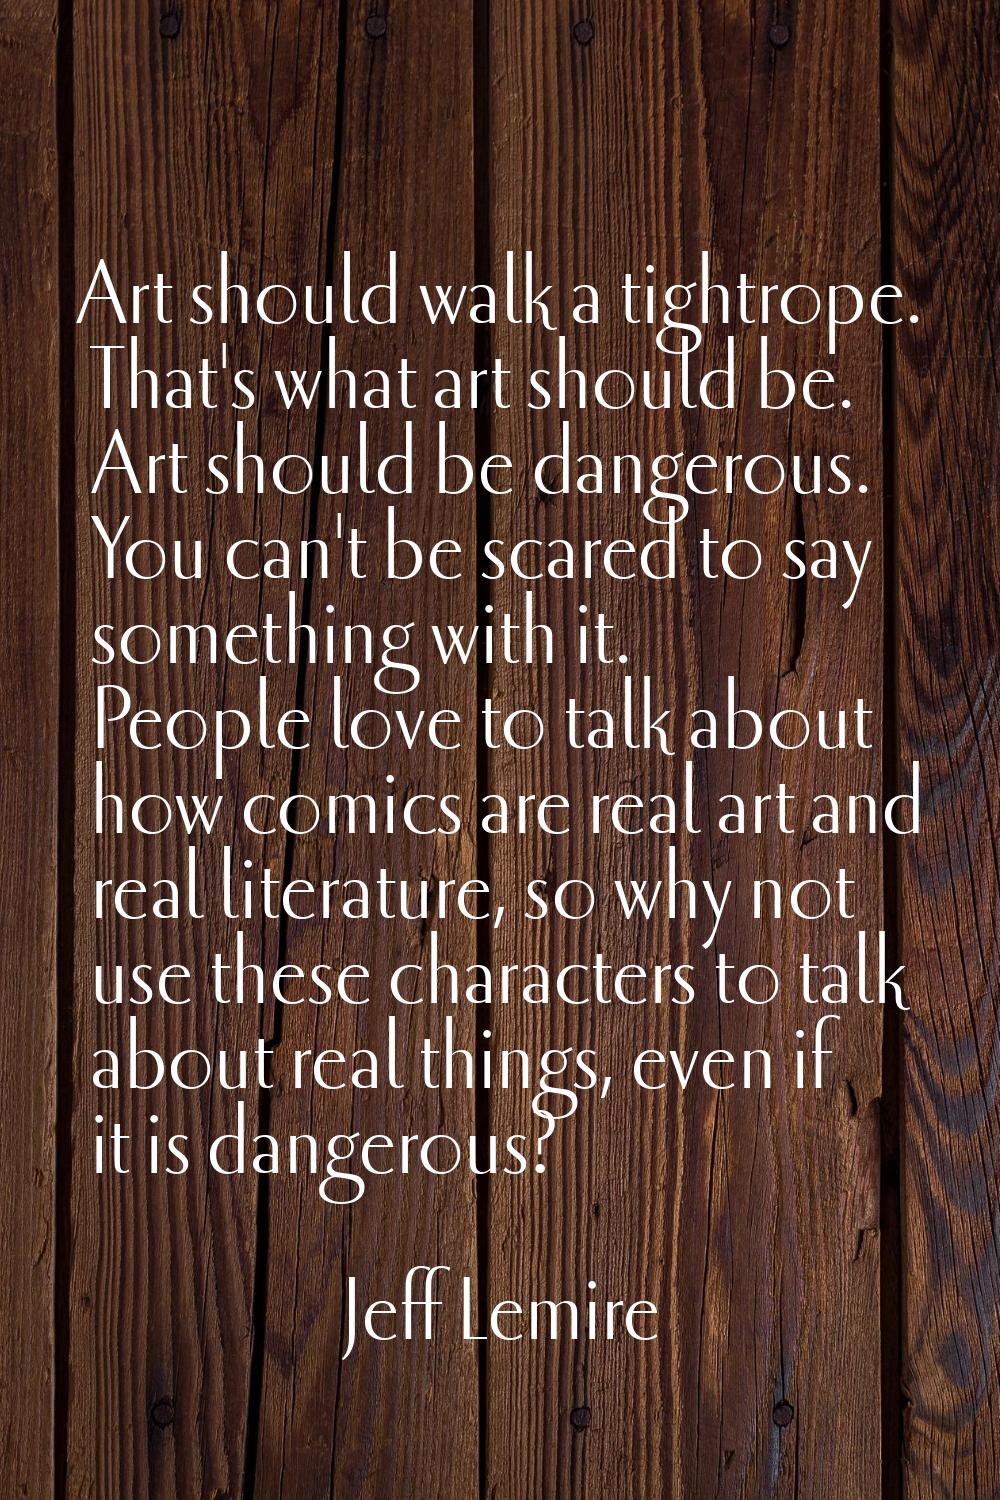 Art should walk a tightrope. That's what art should be. Art should be dangerous. You can't be scare